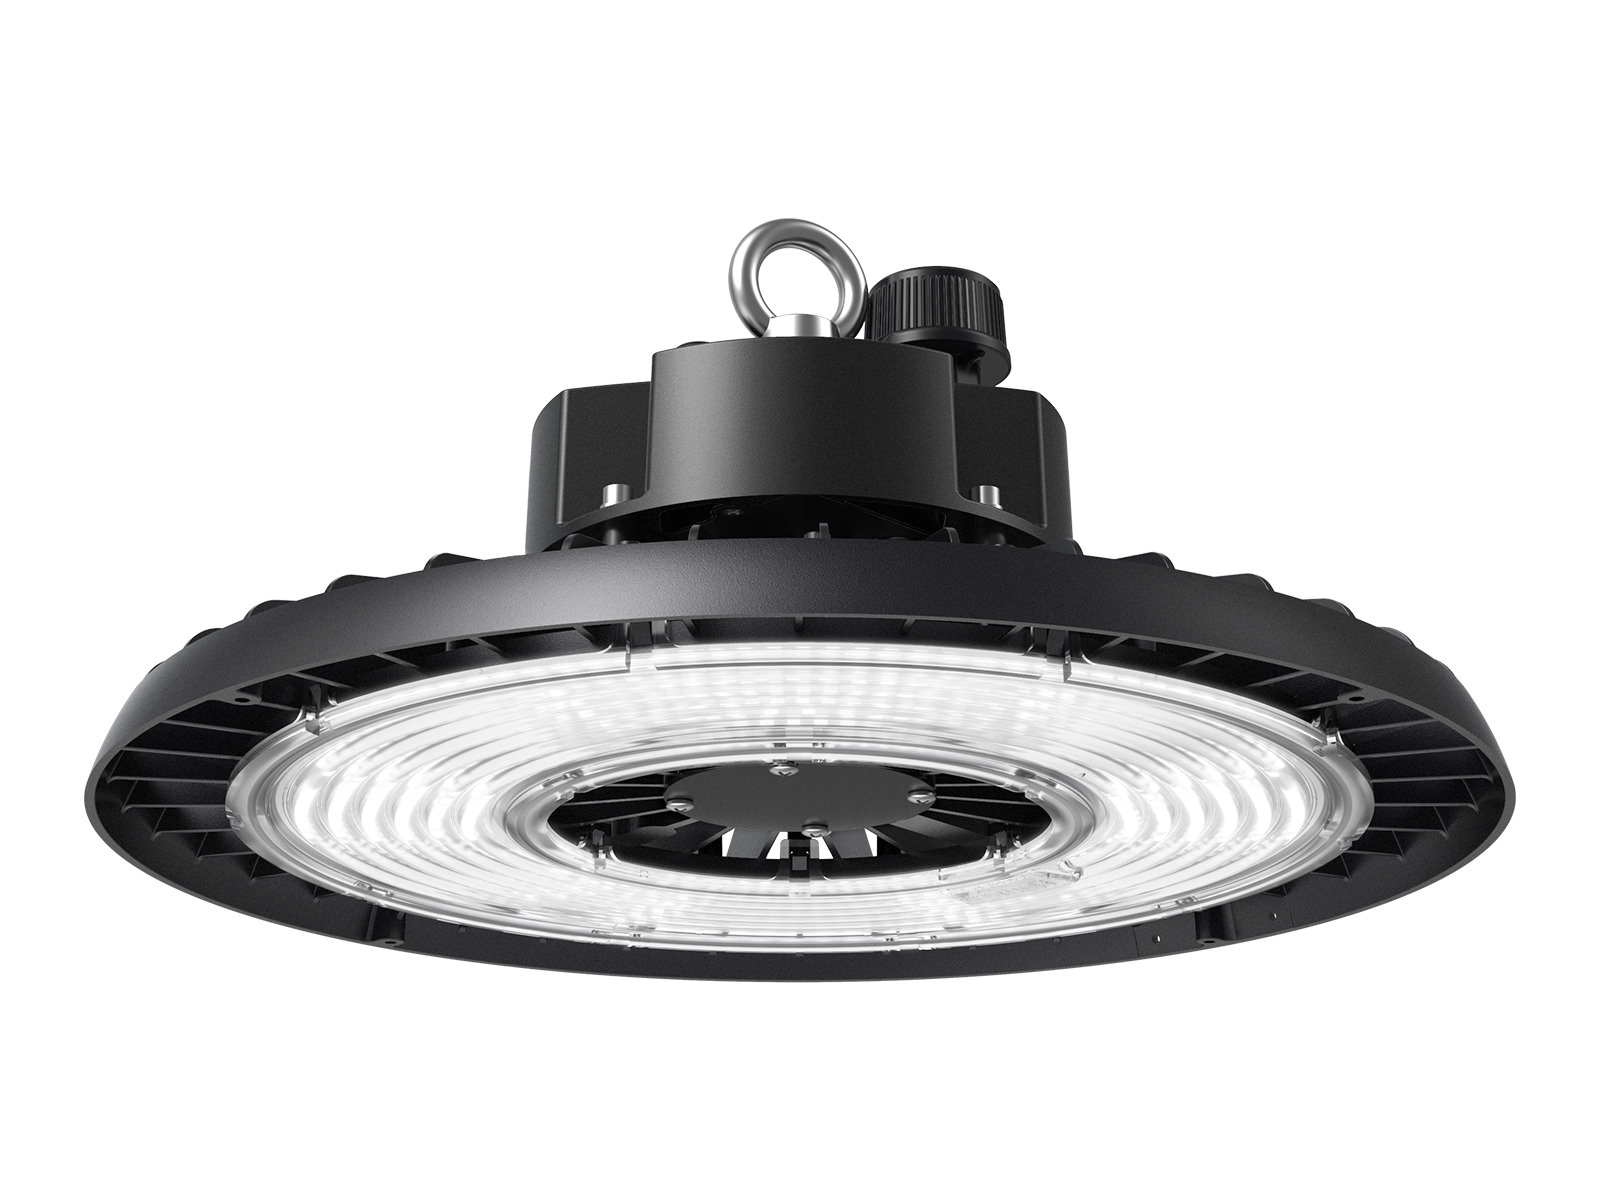 LED High Bay Light 50W 100W 150W 20W Warehouse Commercial Industrial Factory